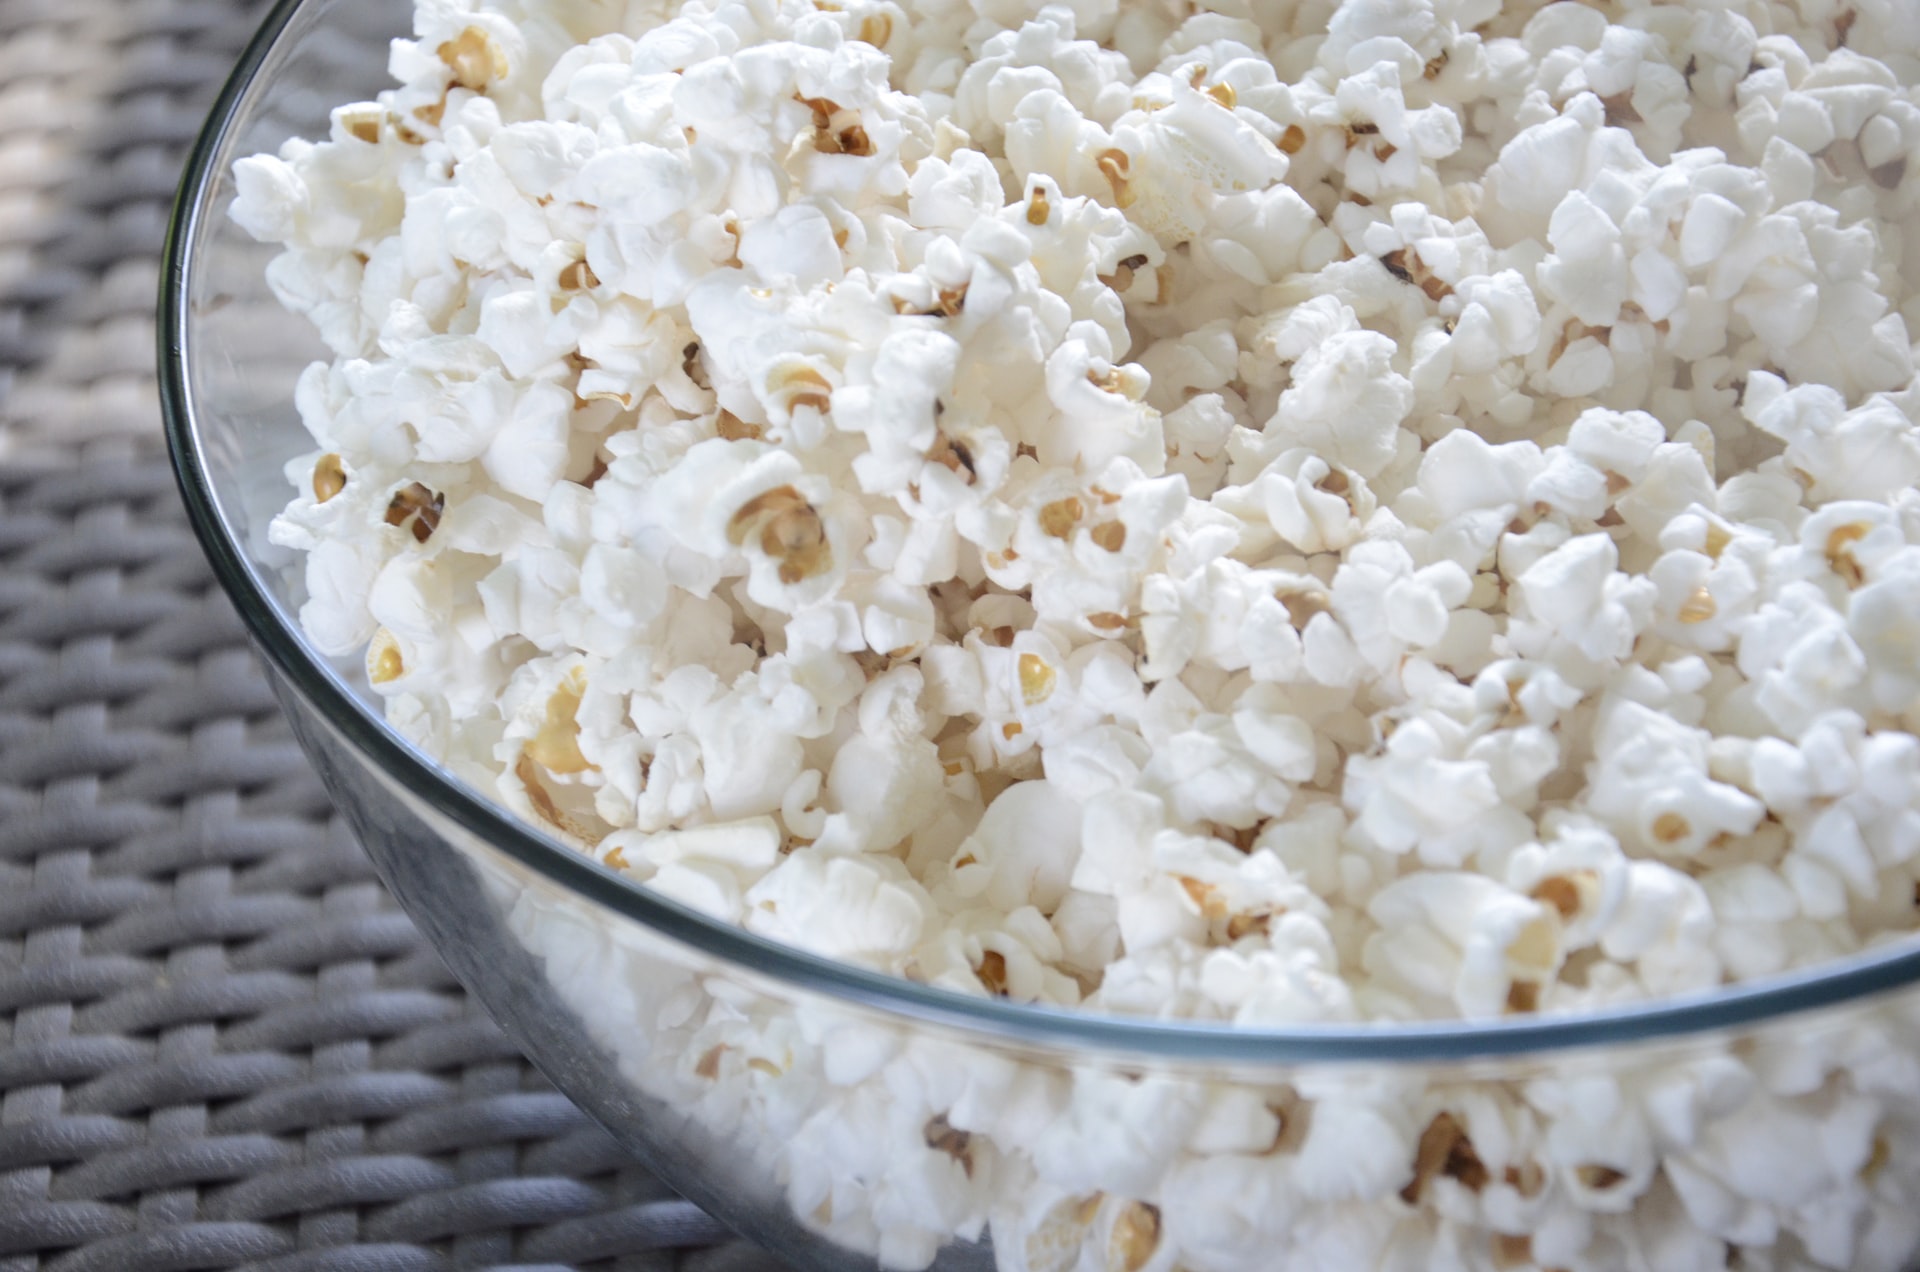 Close-up shot of popcorn in glass bowl on wicker tabletop